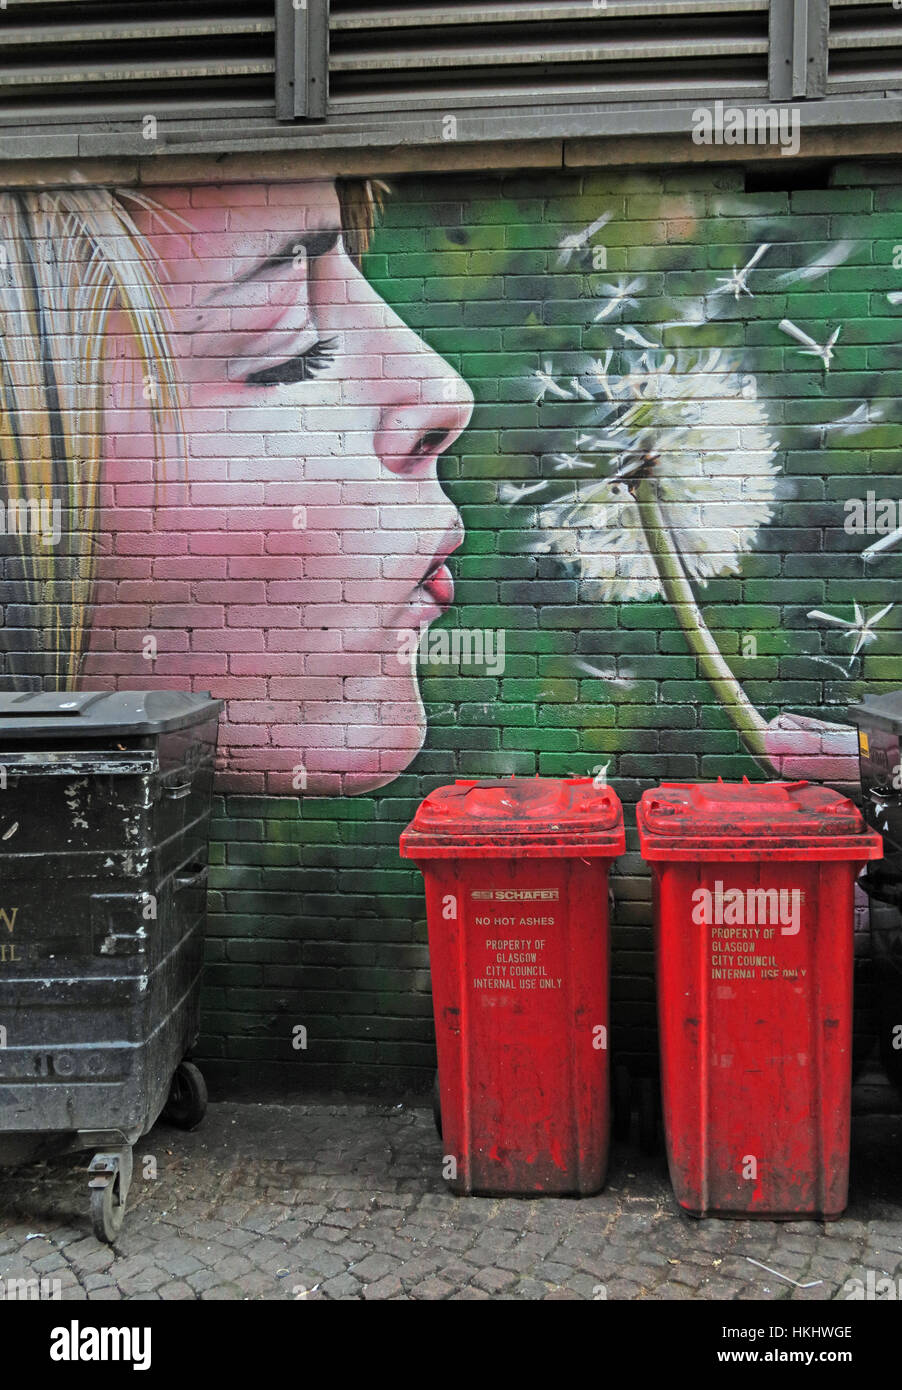 Blond woman blowing the seeds from a dandelion clock, above waste bins, Glasgow, Scotland, UK Stock Photo